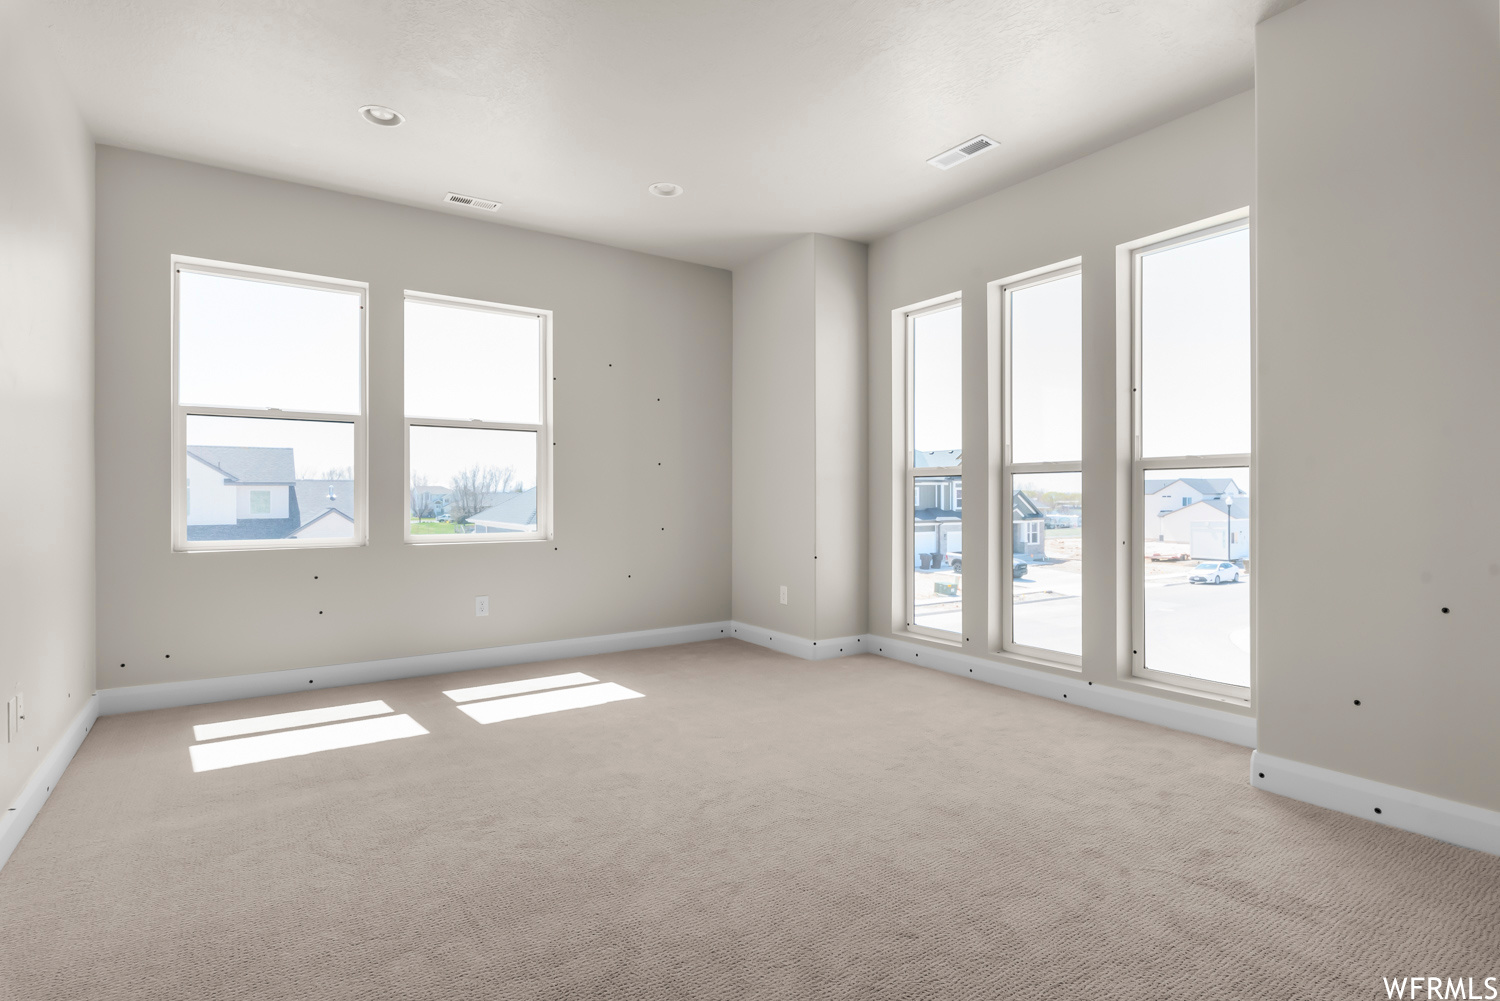 Unfurnished room with a wealth of natural light and light carpet